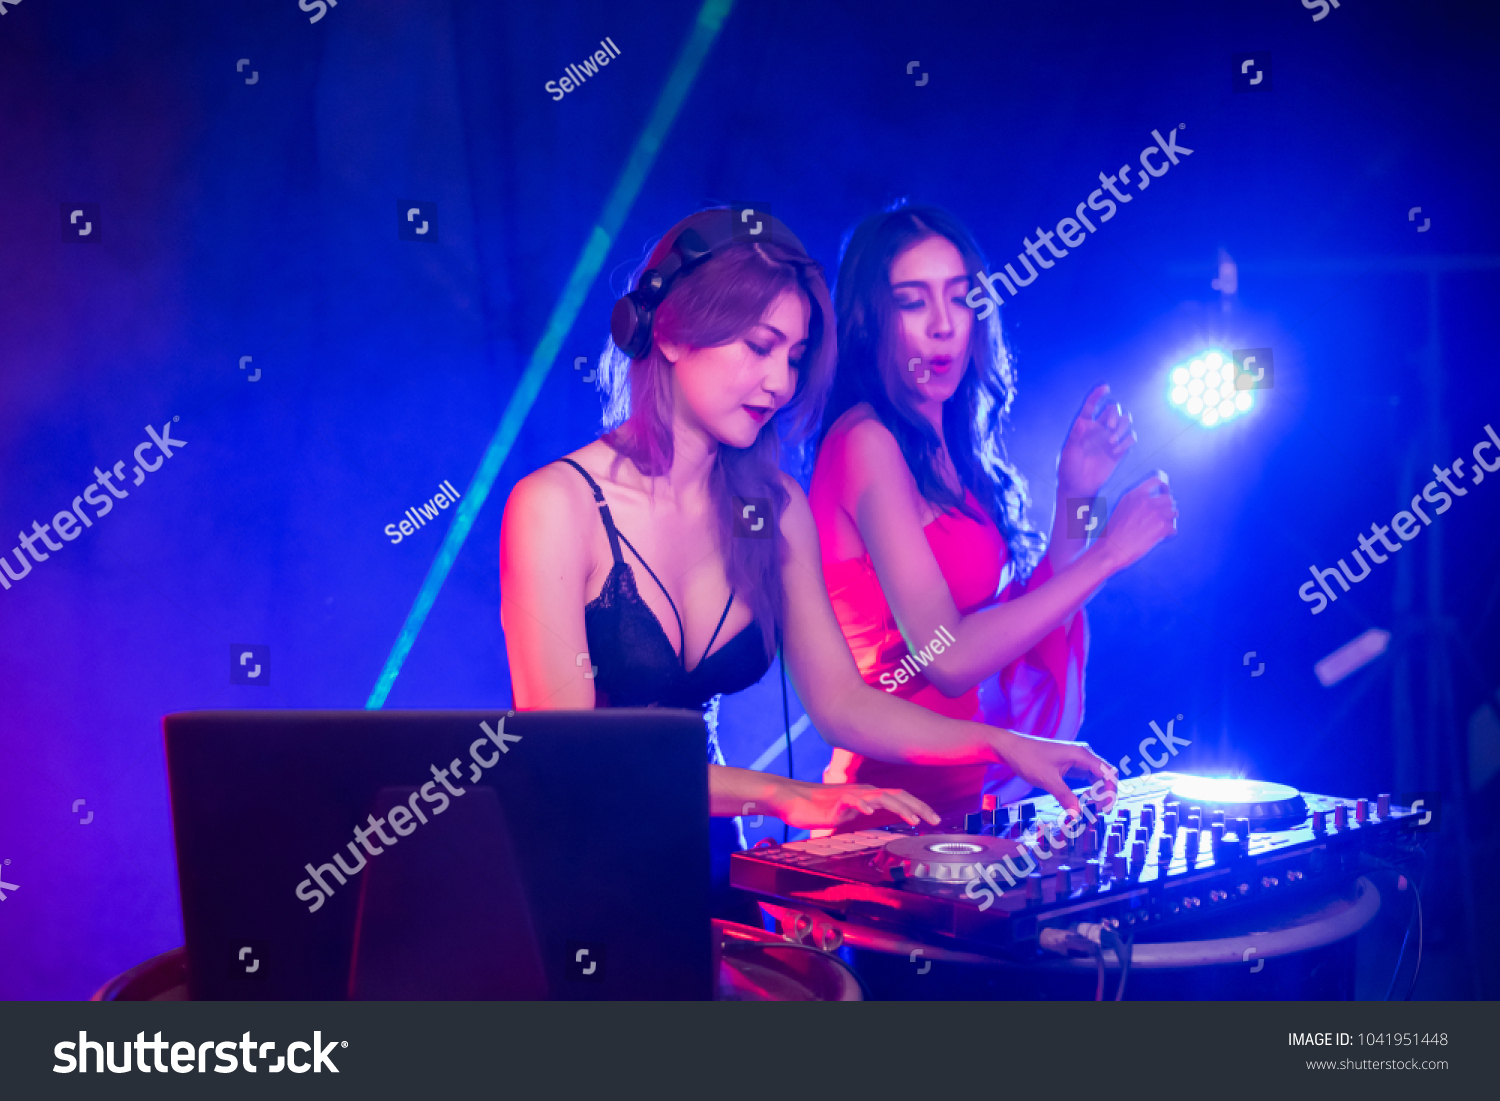 Music Concepts. DJ is rhythm music with Controller and mixer. DJ is playing the song at the party. Young are adjusting the music with the controller. The fun of music and light colors. #1041951448